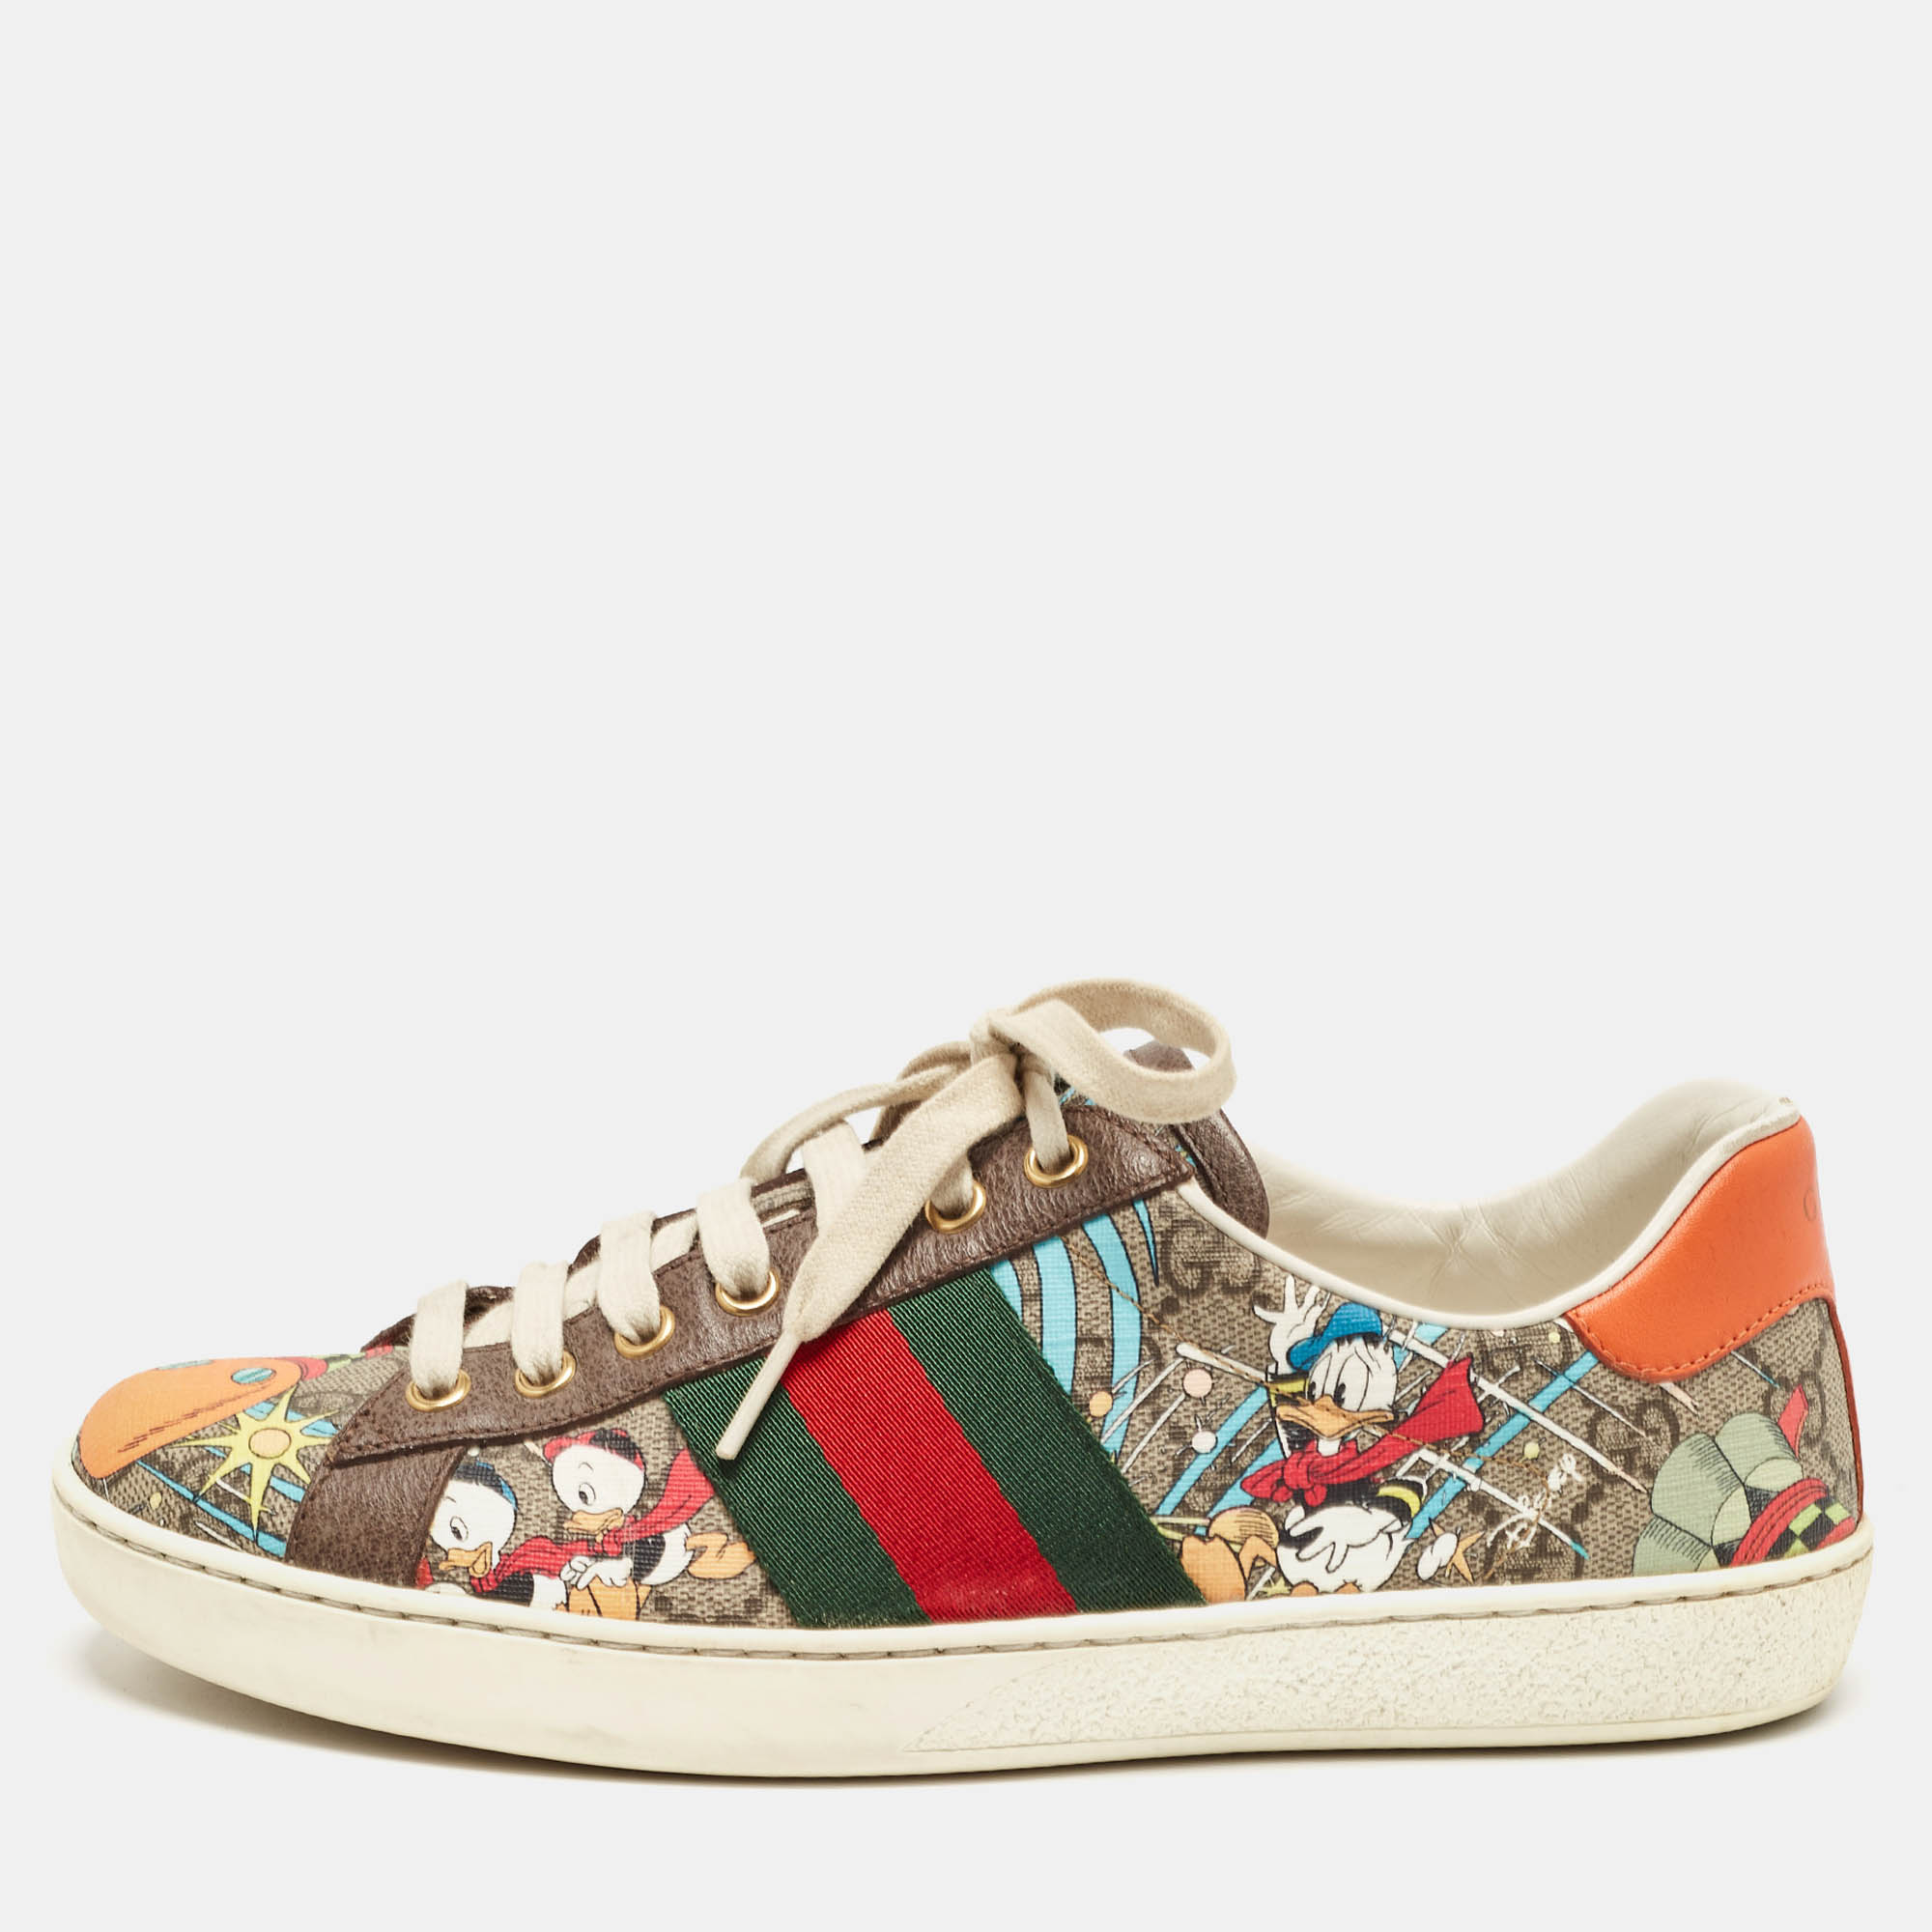 Pre-owned Gucci Multicolor Canvas And Leather Web Ace Sneakers Size 39.5